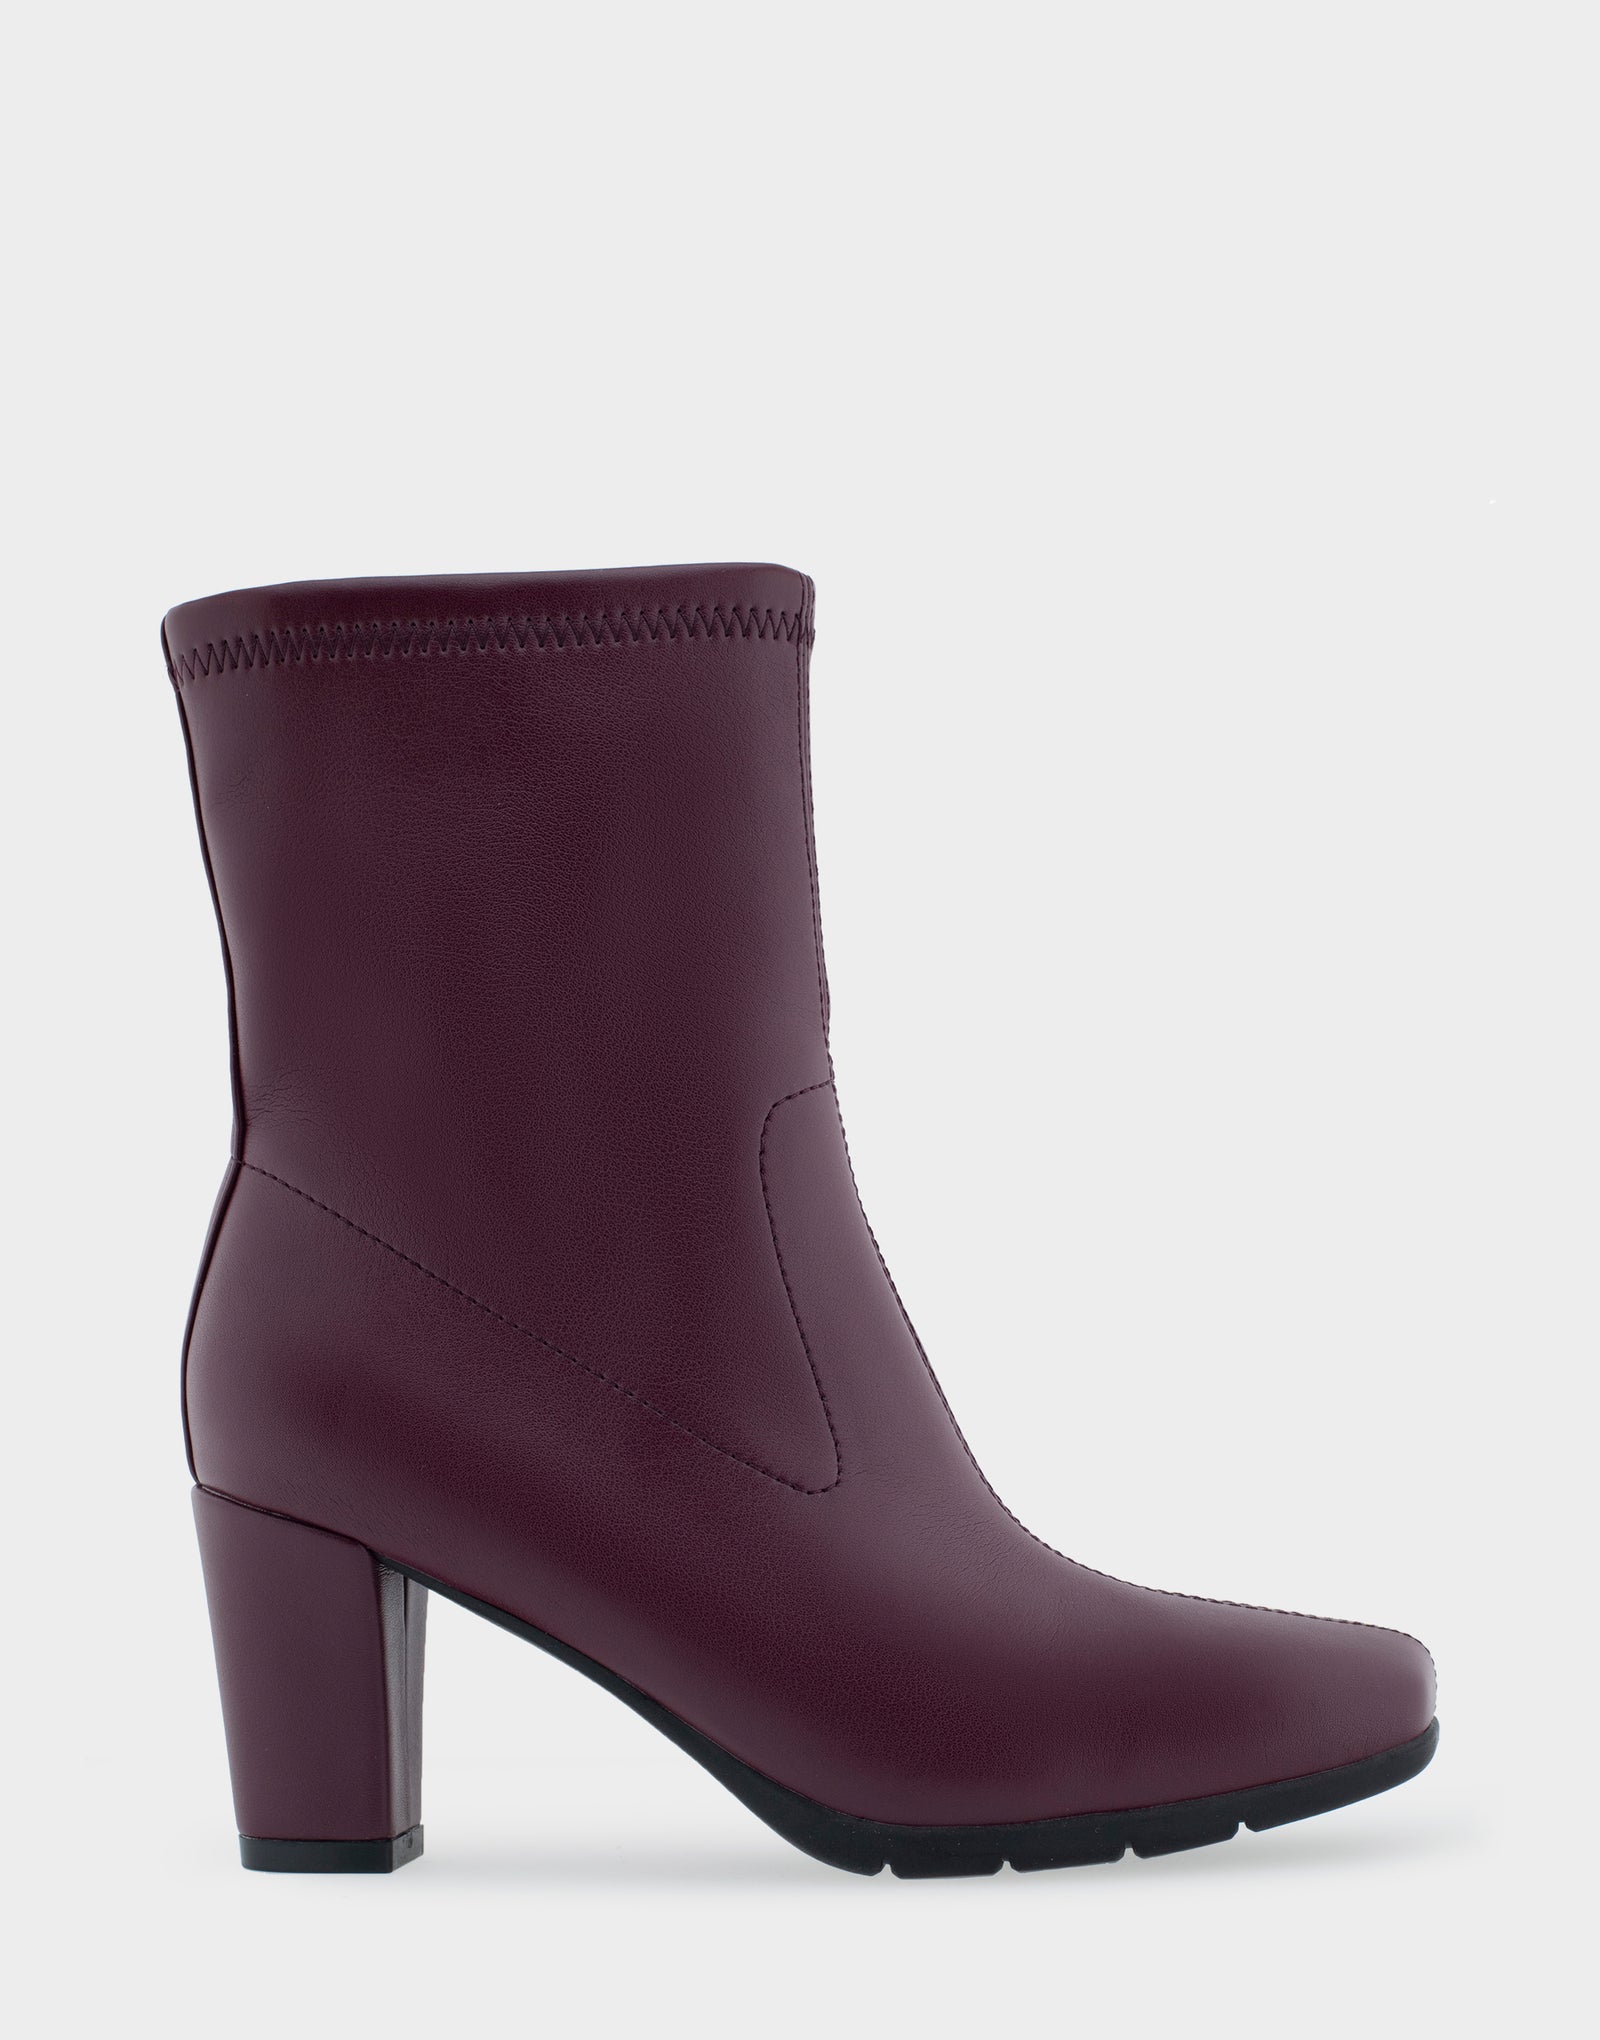 Women's Heeled Ankle Boot in Burgundy